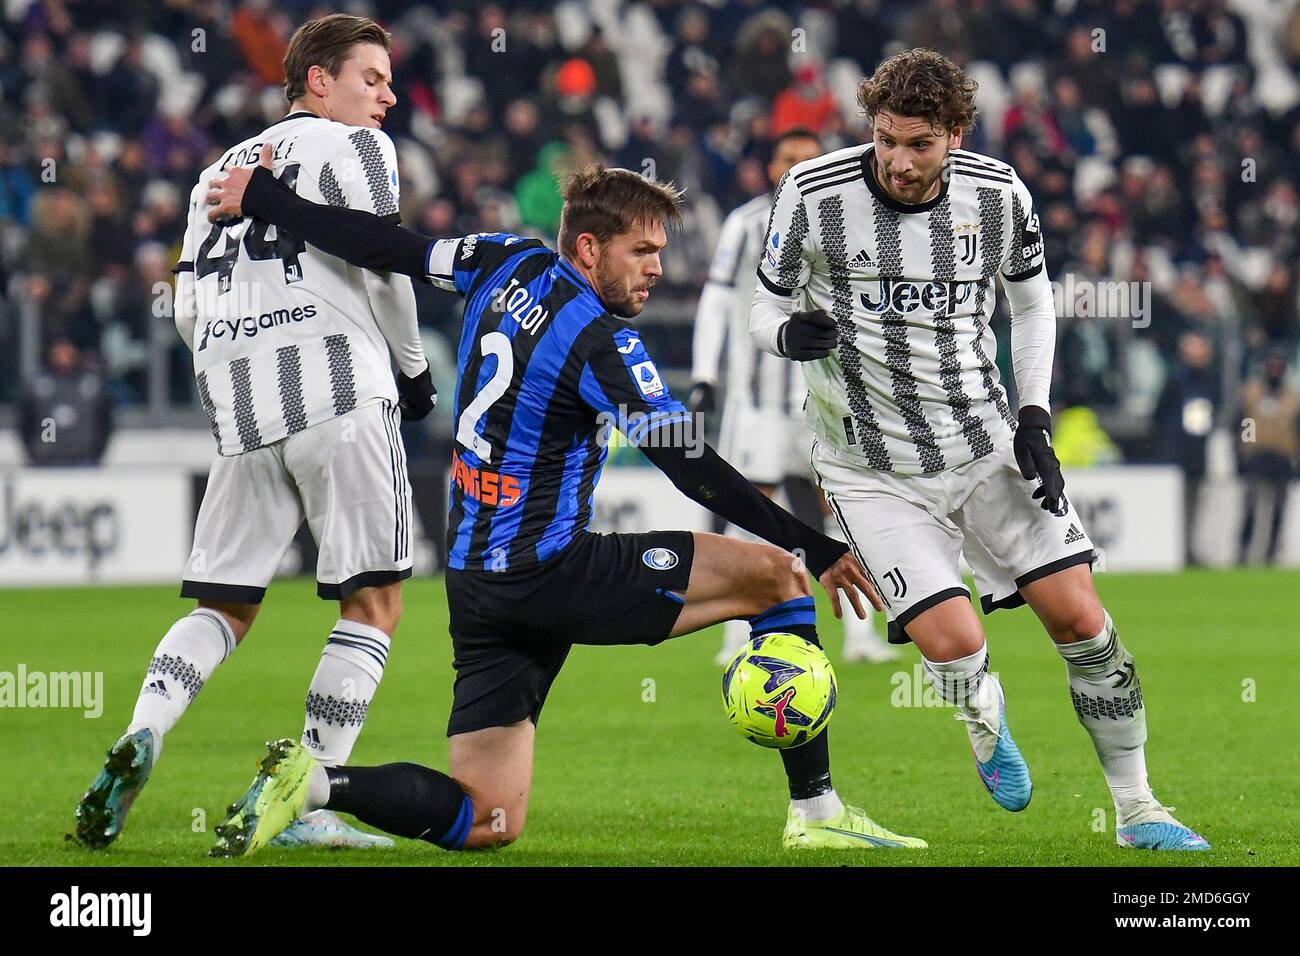 Torino, Italy. 22nd Jan, 2023. Nicolo Fagioli of Juventus FC, Rafael Toloi of Atalanta BC and Manuel Locatelli of Juventus FC compete for the ball during the Serie A football match between Juventus FC and Atalanta BC at Juventus stadium in Torino (Italy), January 22th, 2022. Photo Giuliano Marchisciano/Insidefoto Credit: Insidefoto di andrea staccioli/Alamy Live News Stock Photo